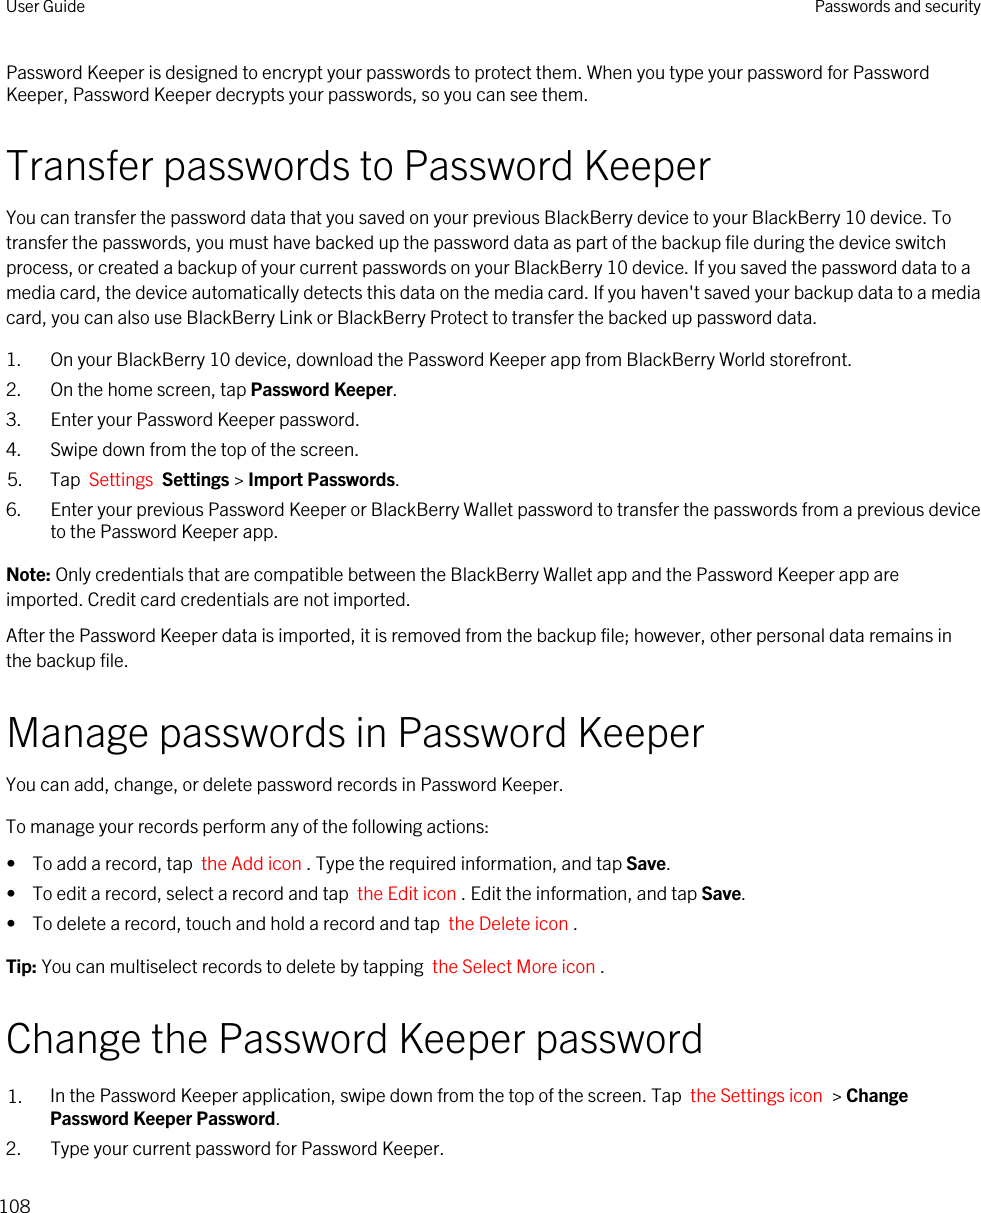 Password Keeper is designed to encrypt your passwords to protect them. When you type your password for Password Keeper, Password Keeper decrypts your passwords, so you can see them.Transfer passwords to Password KeeperYou can transfer the password data that you saved on your previous BlackBerry device to your BlackBerry 10 device. To transfer the passwords, you must have backed up the password data as part of the backup file during the device switch process, or created a backup of your current passwords on your BlackBerry 10 device. If you saved the password data to a media card, the device automatically detects this data on the media card. If you haven&apos;t saved your backup data to a media card, you can also use BlackBerry Link or BlackBerry Protect to transfer the backed up password data.1. On your BlackBerry 10 device, download the Password Keeper app from BlackBerry World storefront.2. On the home screen, tap Password Keeper.3. Enter your Password Keeper password.4. Swipe down from the top of the screen.5. Tap  Settings  Settings &gt; Import Passwords.6. Enter your previous Password Keeper or BlackBerry Wallet password to transfer the passwords from a previous device to the Password Keeper app.Note: Only credentials that are compatible between the BlackBerry Wallet app and the Password Keeper app are imported. Credit card credentials are not imported.After the Password Keeper data is imported, it is removed from the backup file; however, other personal data remains in the backup file.Manage passwords in Password KeeperYou can add, change, or delete password records in Password Keeper.To manage your records perform any of the following actions:•  To add a record, tap  the Add icon . Type the required information, and tap Save.•  To edit a record, select a record and tap  the Edit icon . Edit the information, and tap Save.•  To delete a record, touch and hold a record and tap  the Delete icon .Tip: You can multiselect records to delete by tapping  the Select More icon .Change the Password Keeper password1. In the Password Keeper application, swipe down from the top of the screen. Tap  the Settings icon  &gt; Change Password Keeper Password.2. Type your current password for Password Keeper.User Guide Passwords and security108